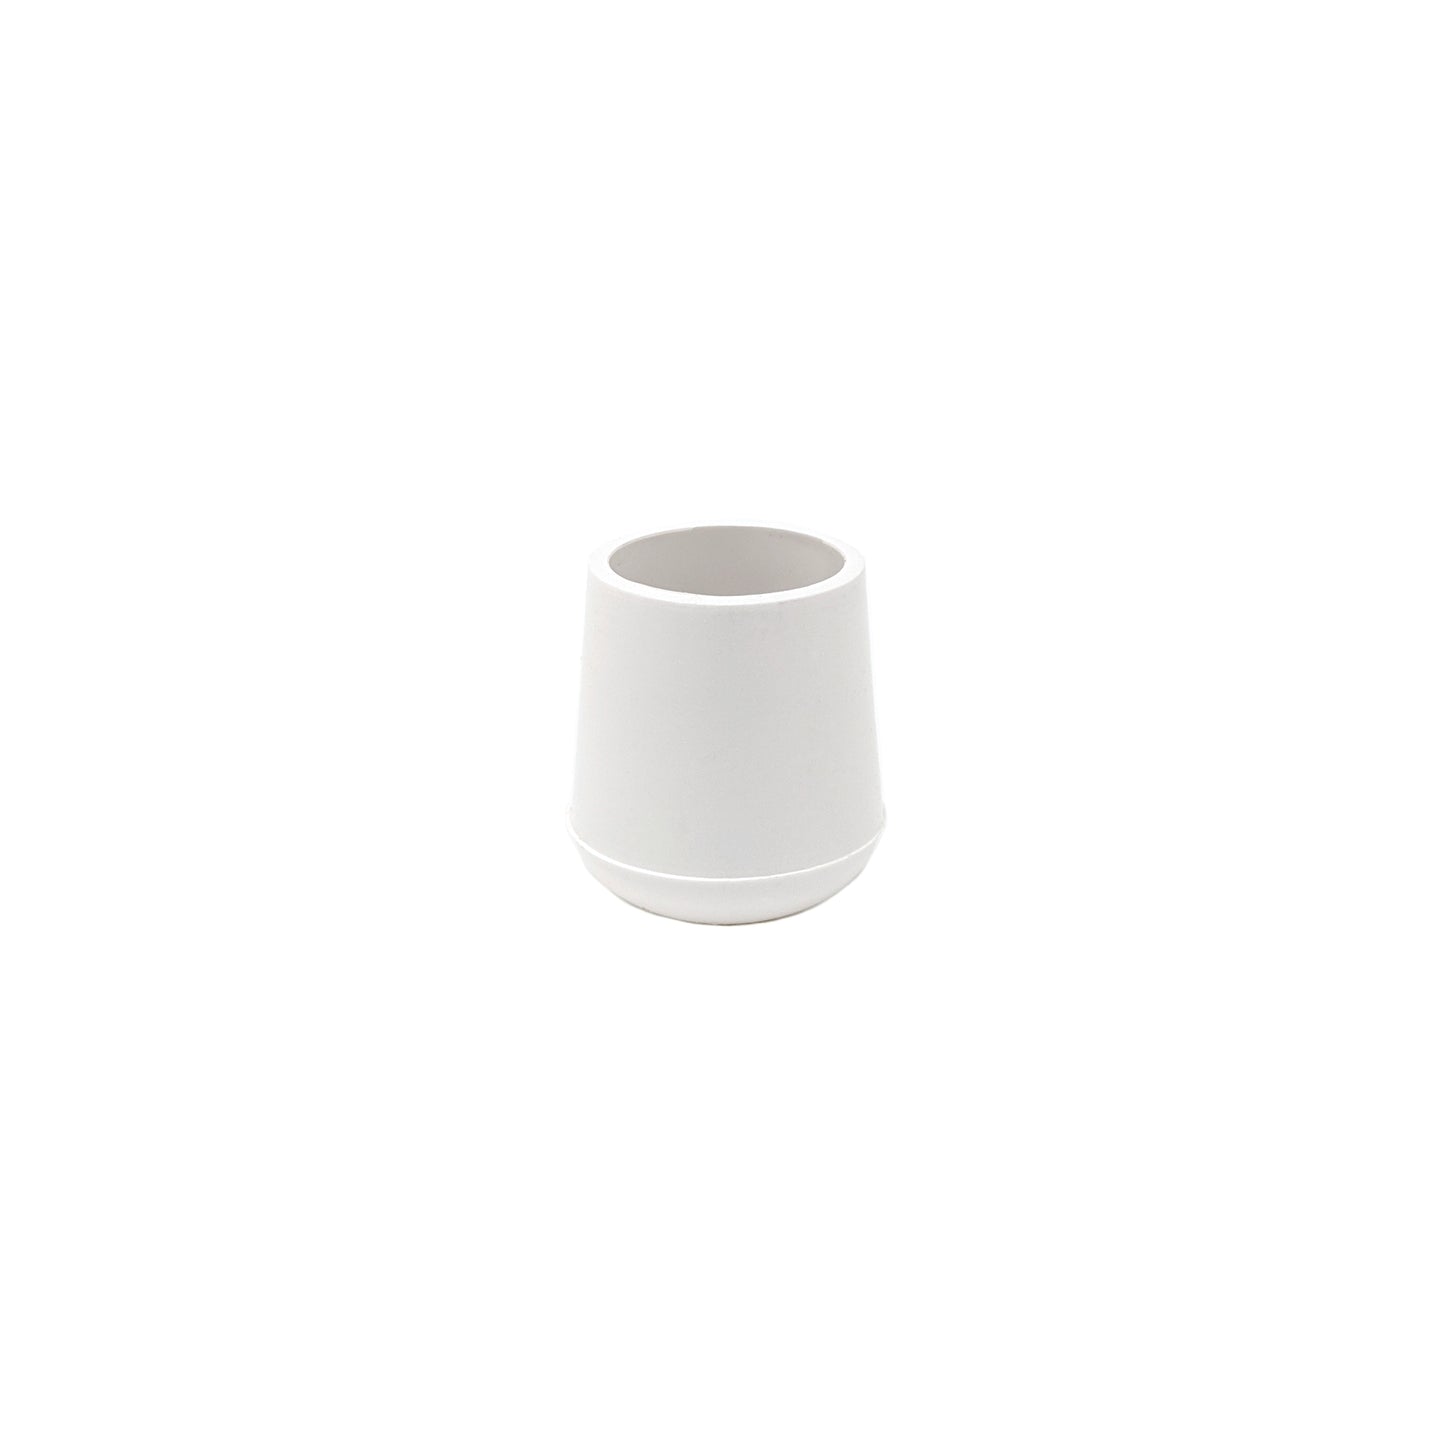 18mm White Rubber Ferrules with Steel Base Insert - Made in Germany - Keay Vital Parts